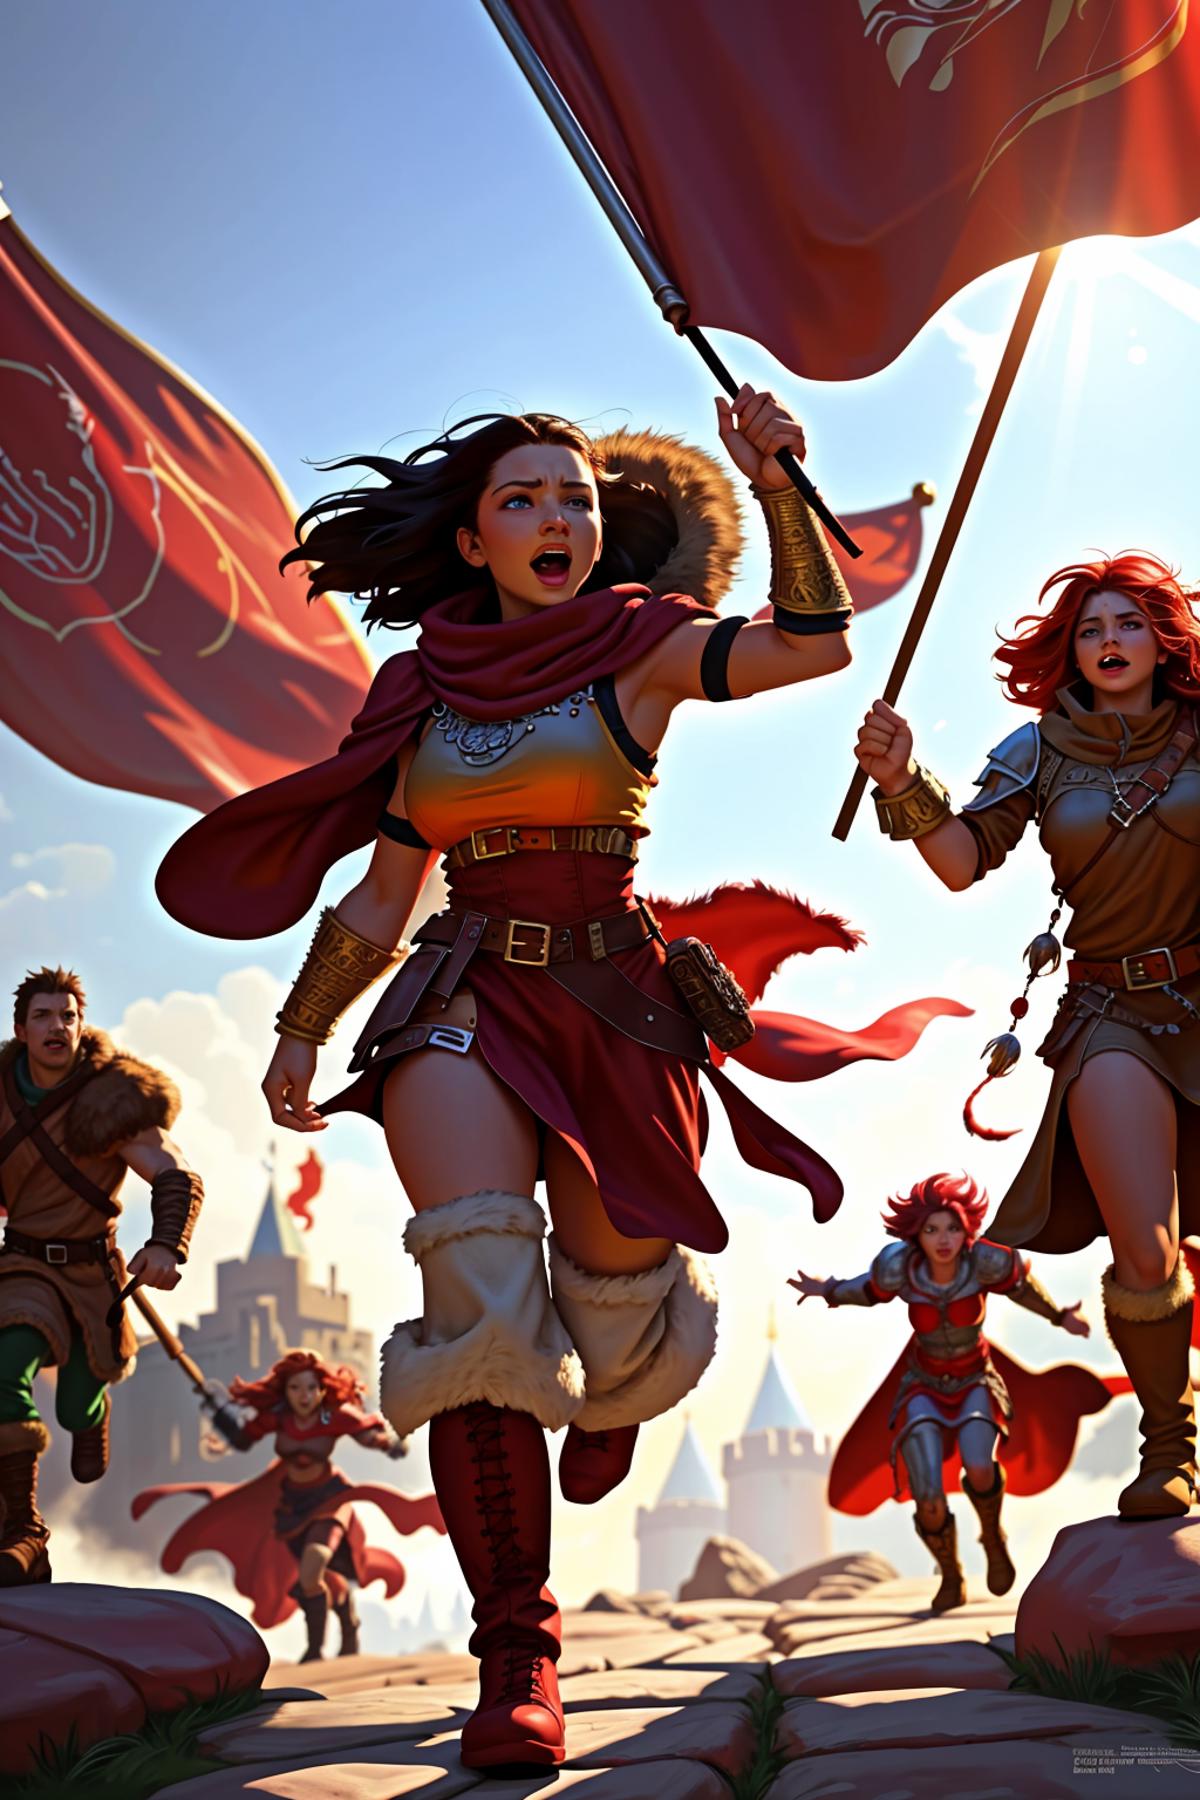 A group of warriors in a fantasy setting, with one woman holding a flag.